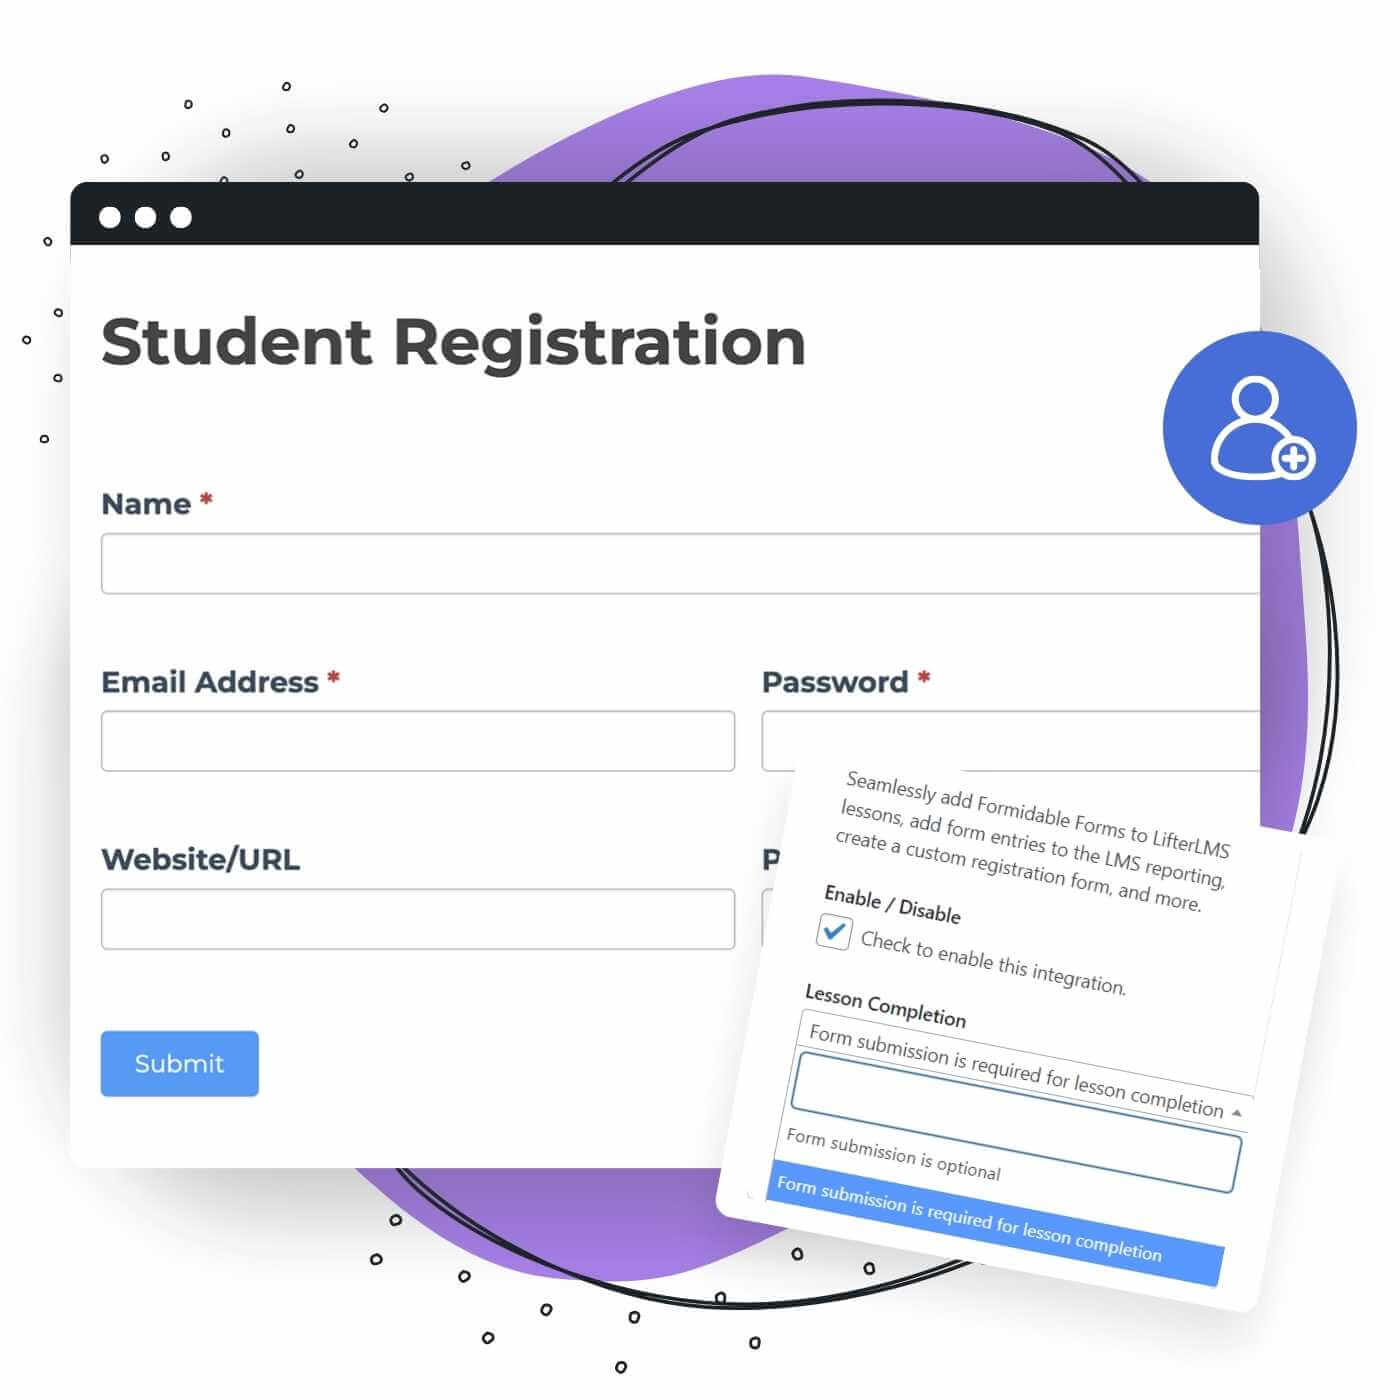 Customize the student registration form using Formidable Forms and LifterLMS